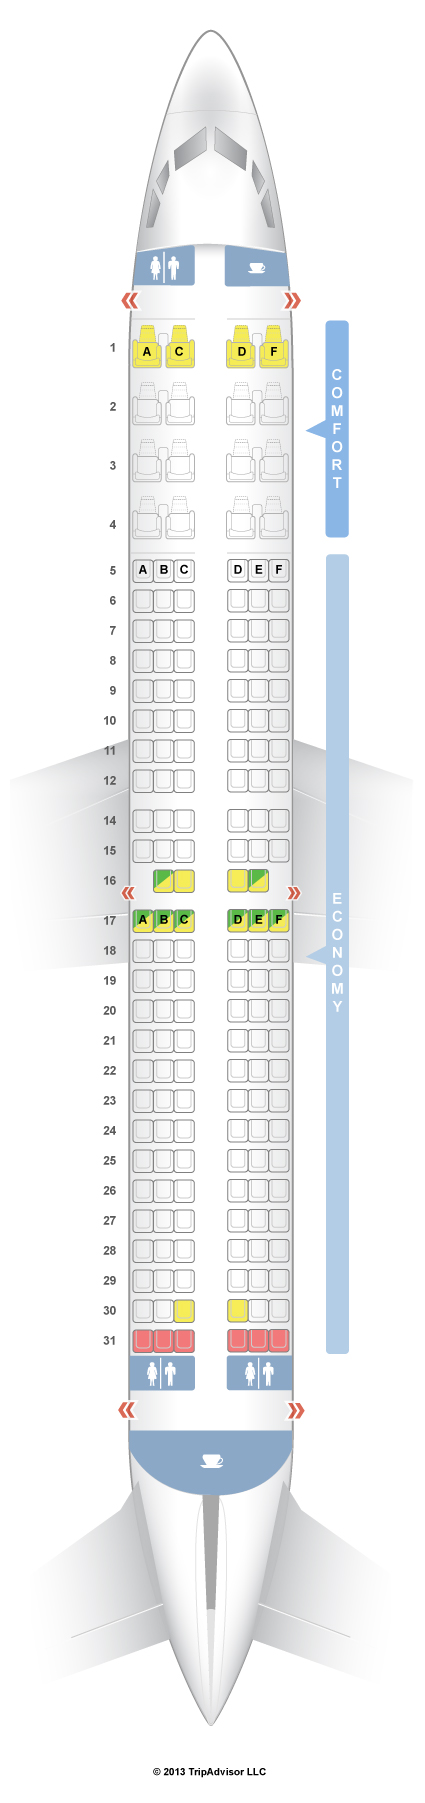 Alaska Airlines Seating Chart 737 800